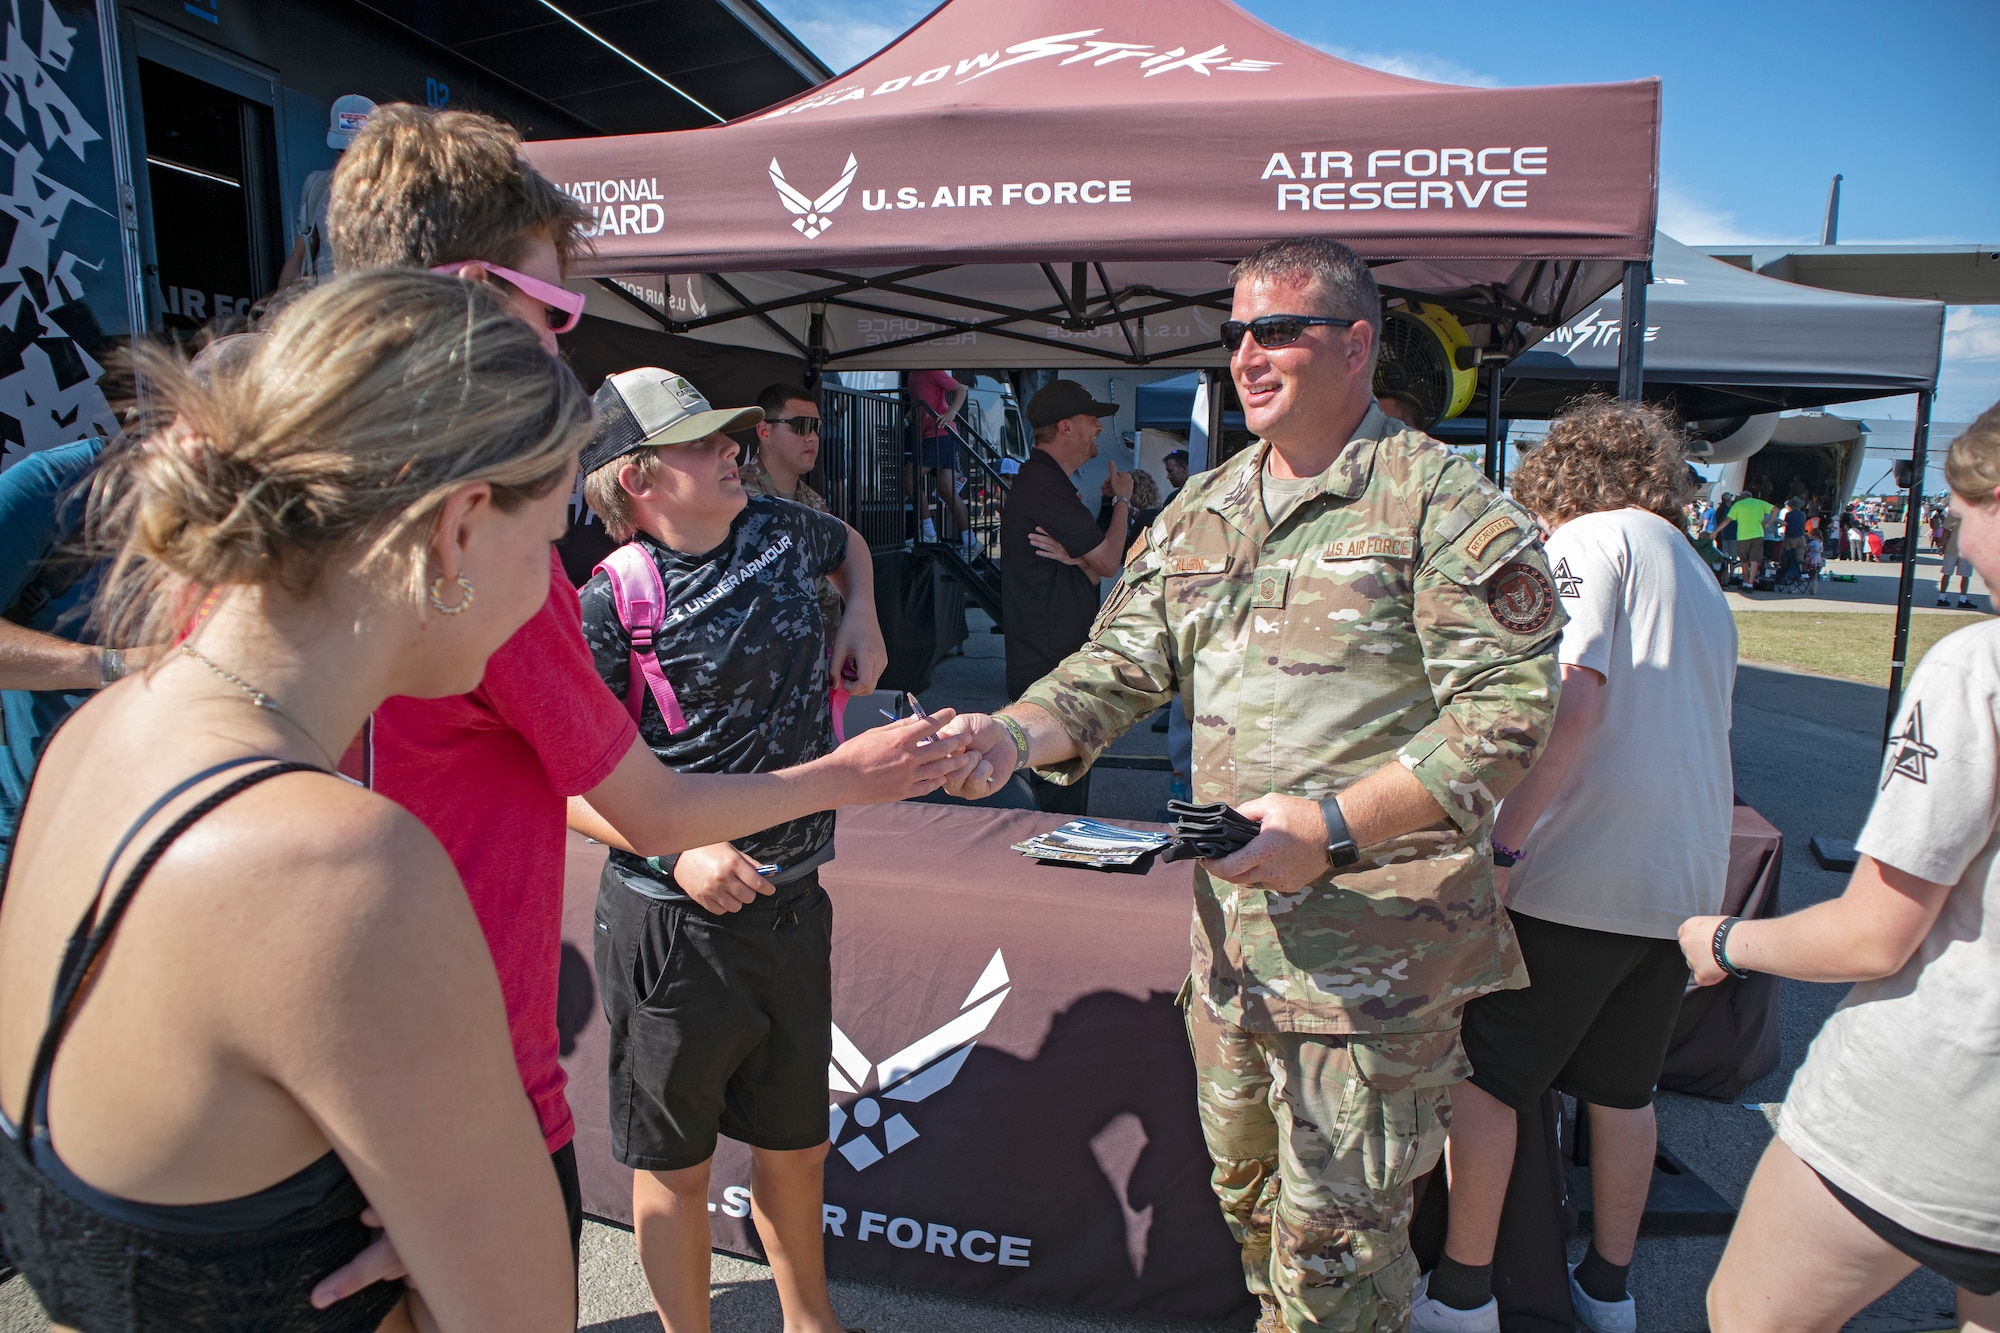 Master Sgt. Justin Klein, 934th Airlift Wing lead recruiter, speaks with airshow visitors